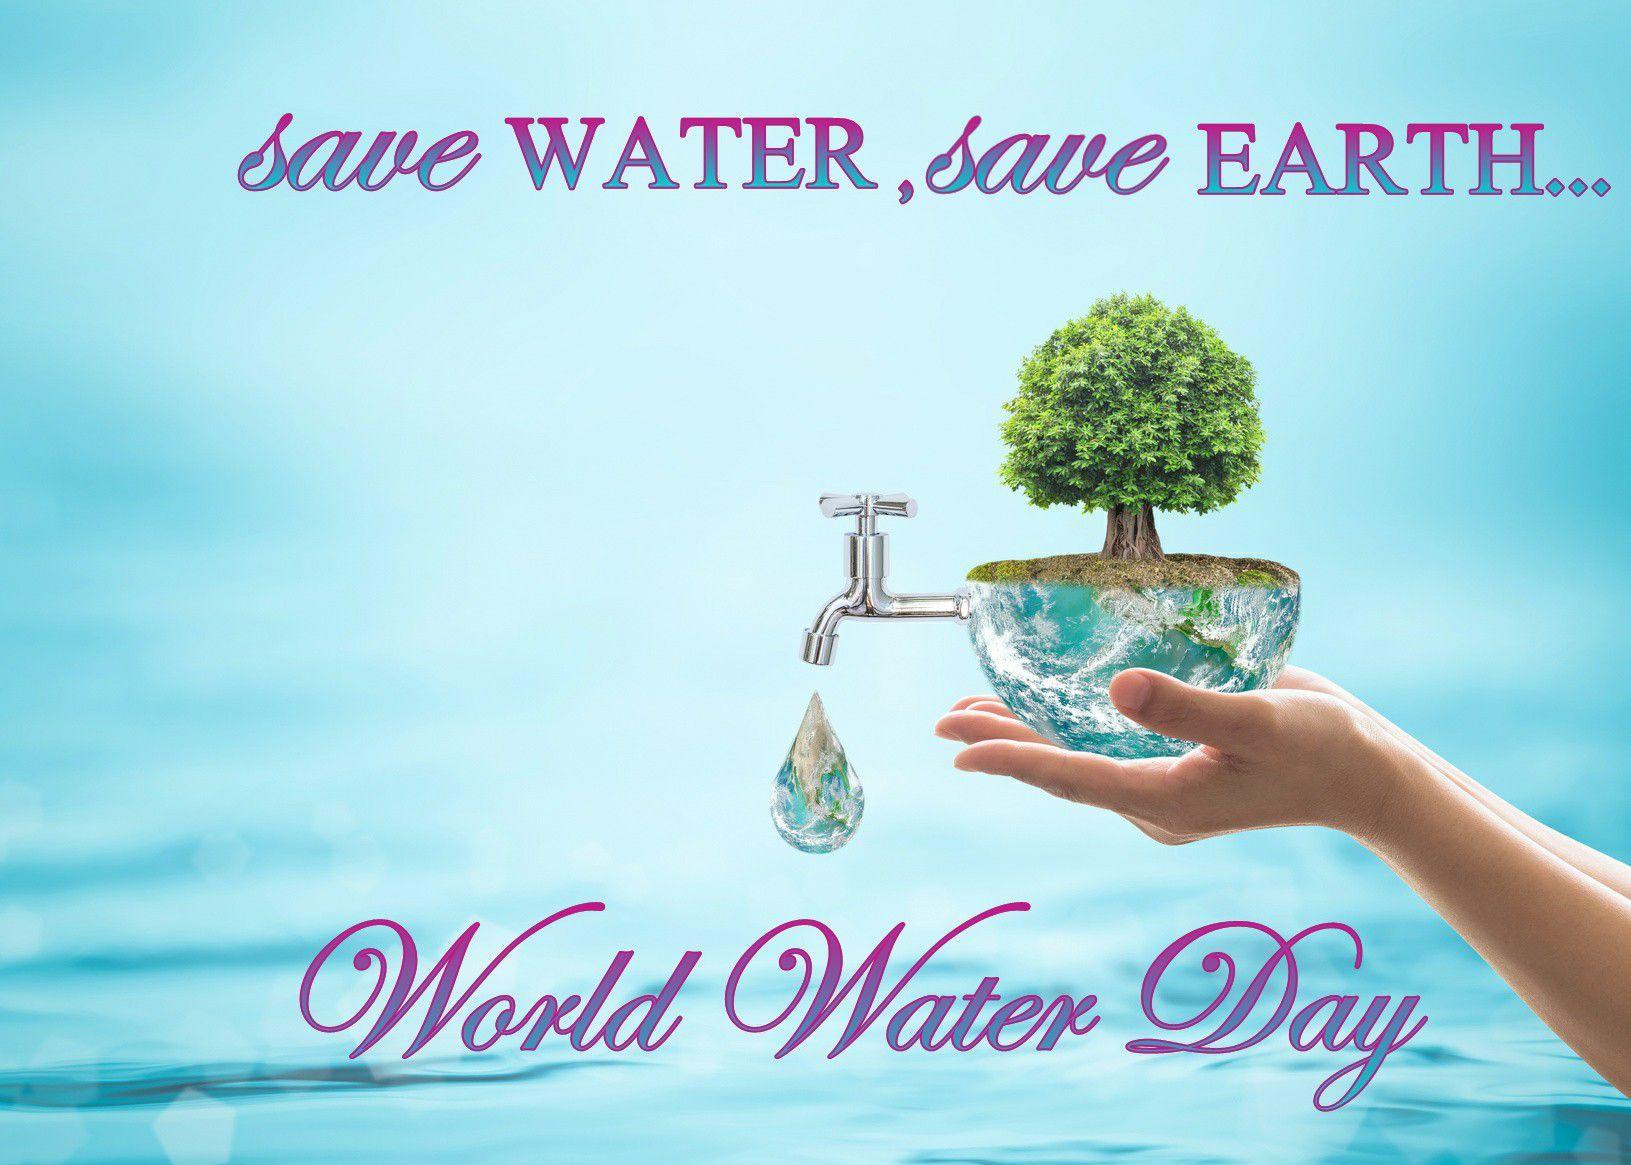 World Water Day Download Wallpapers